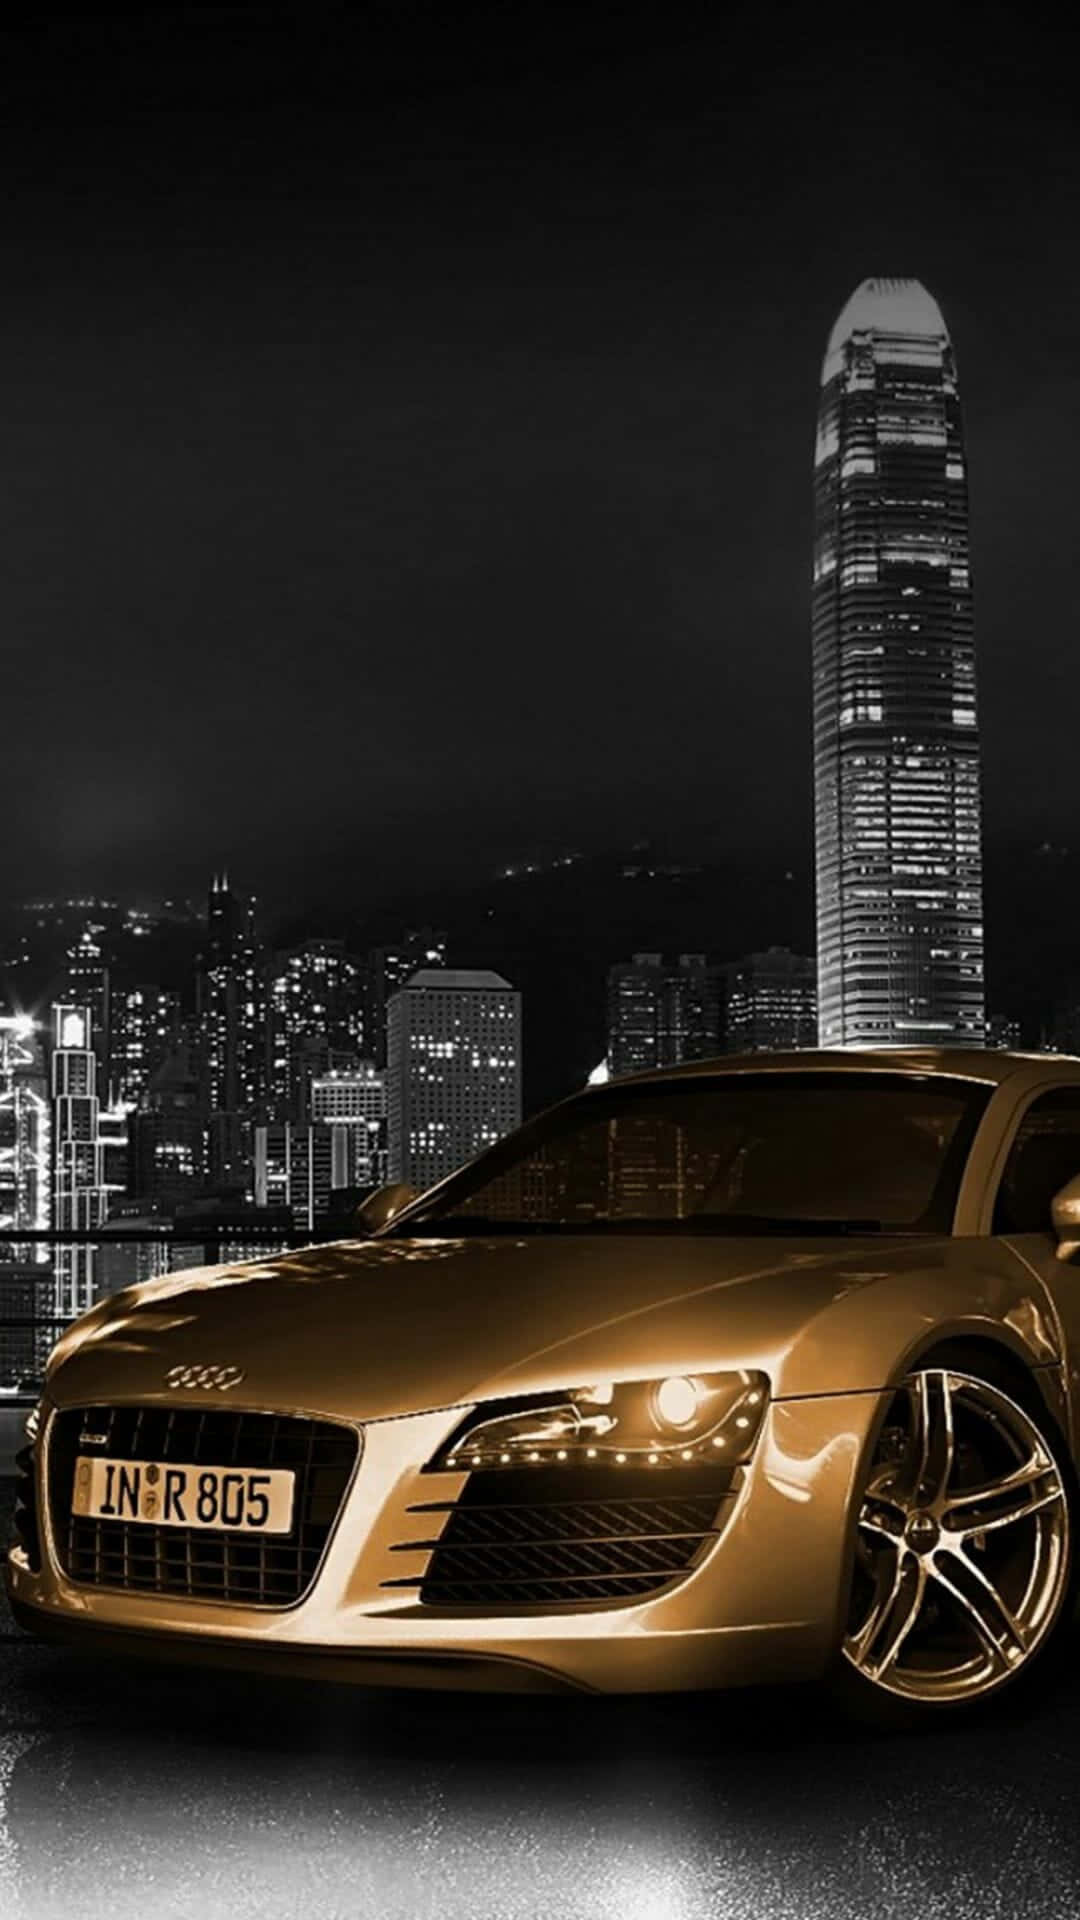 Gold Cars And Skyscraper Background